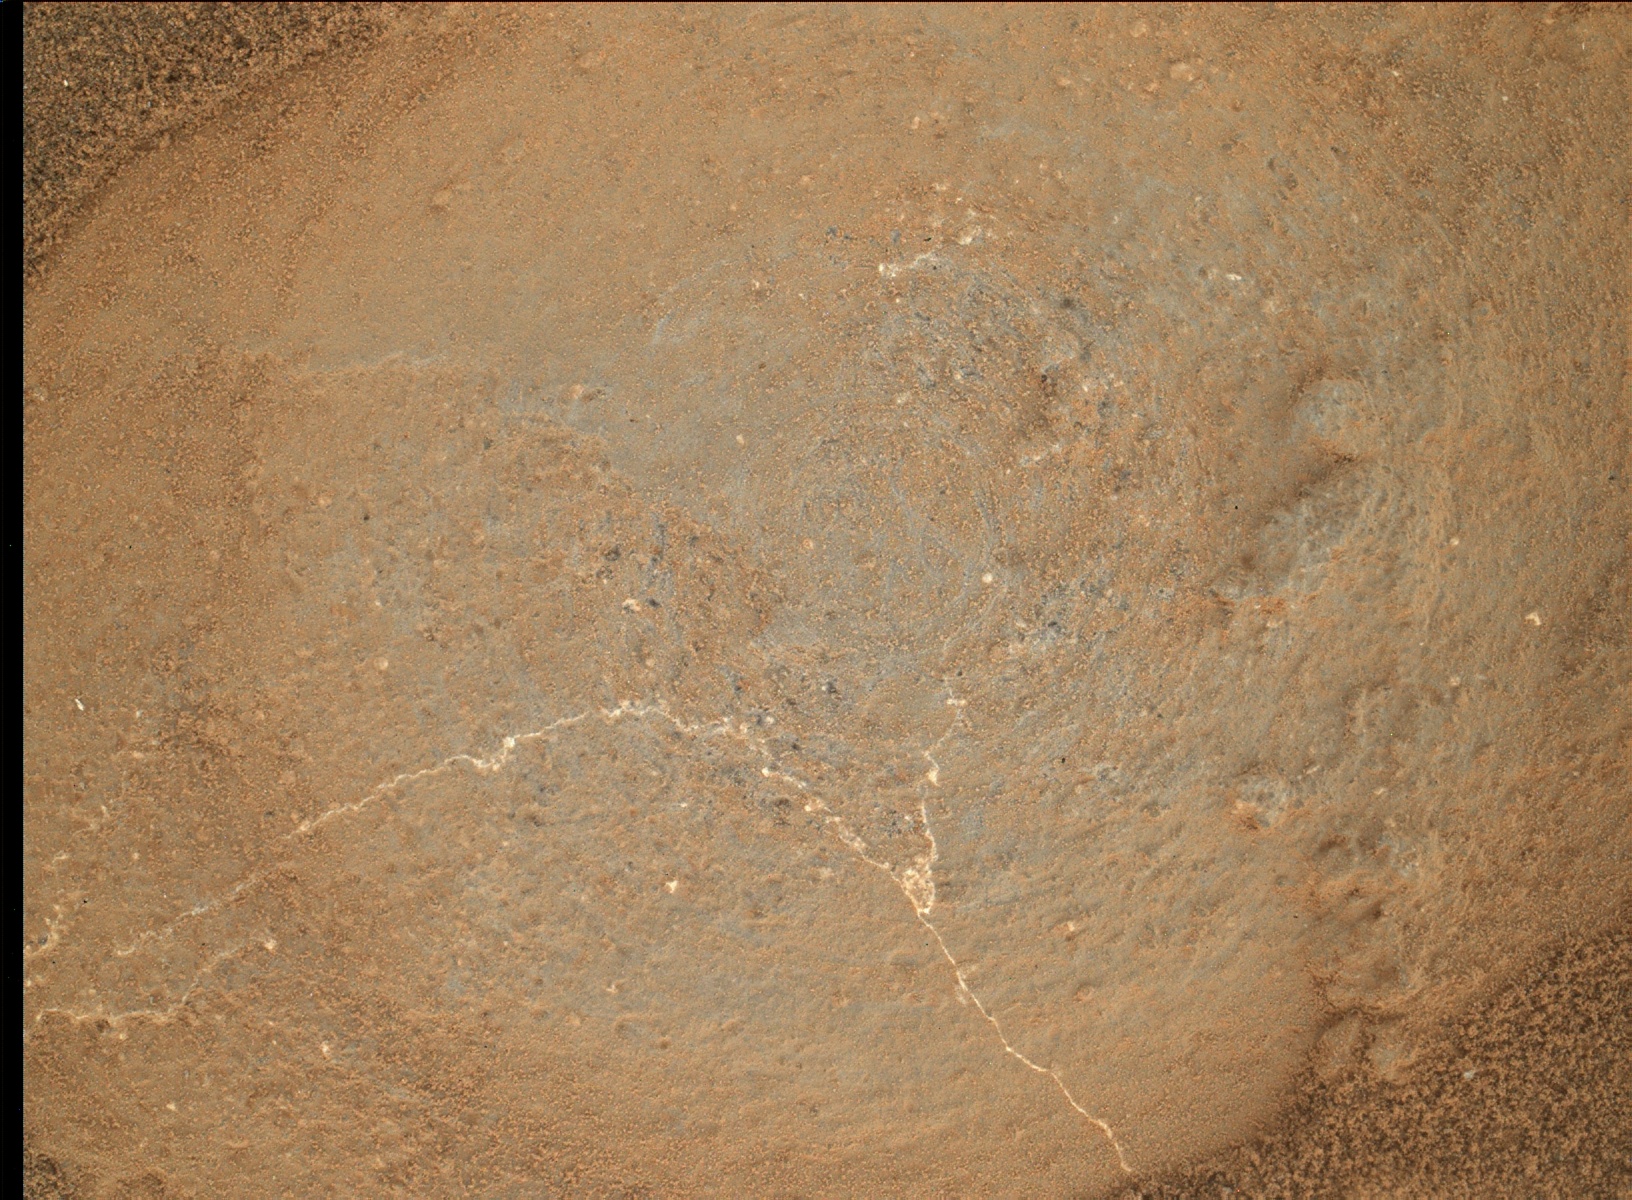 Nasa's Mars rover Curiosity acquired this image using its Mars Hand Lens Imager (MAHLI) on Sol 722